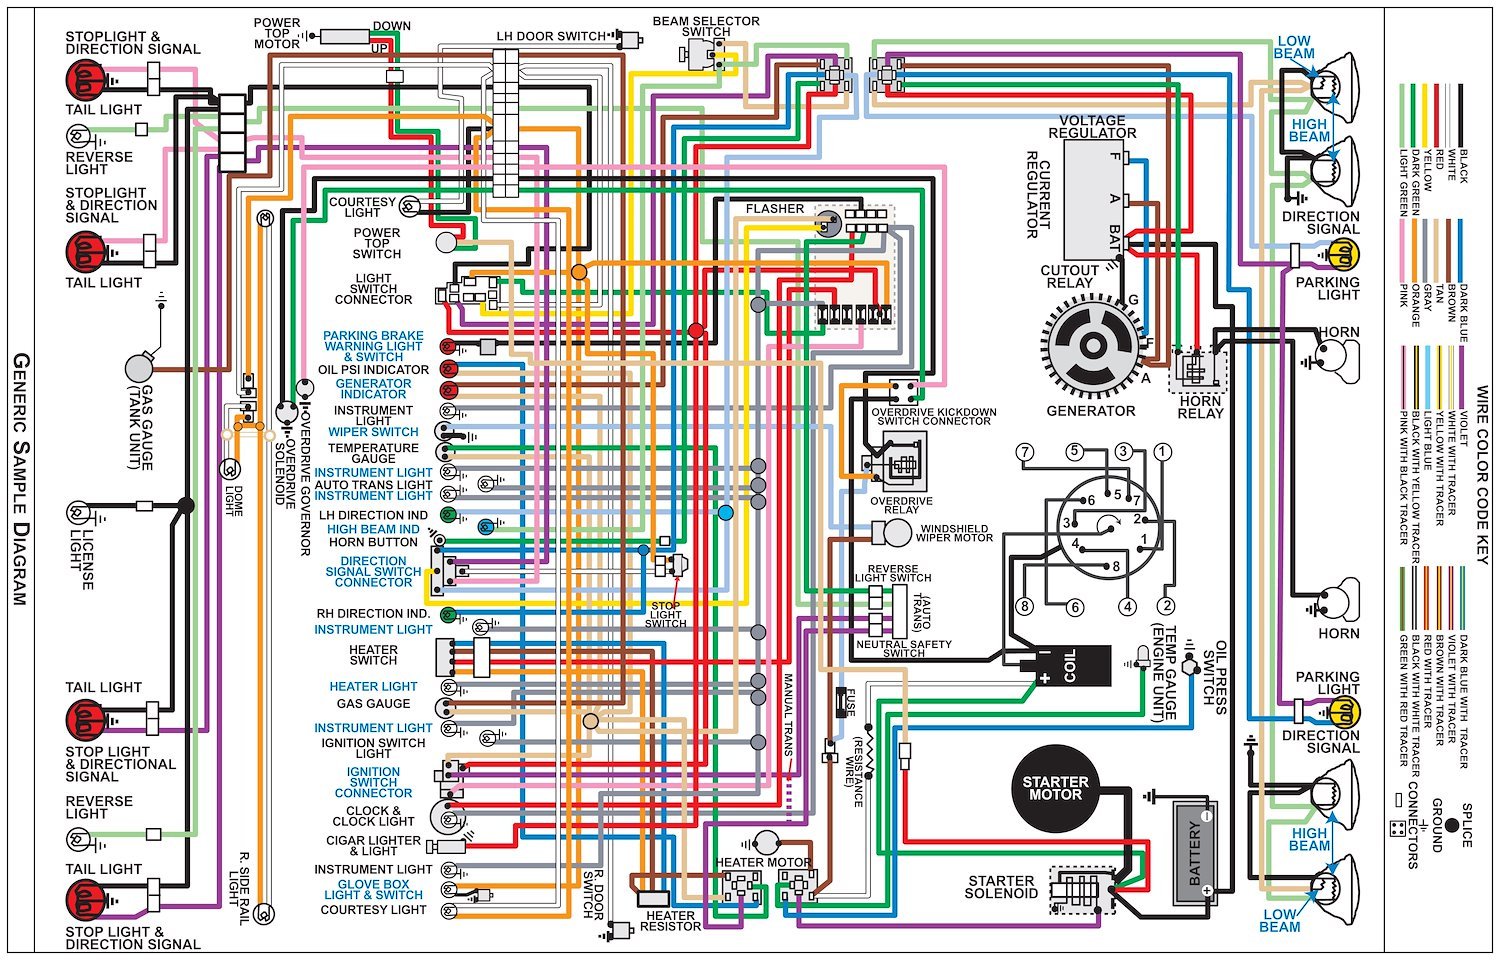 Wiring Diagram for 1967 Dodge Coronet, 11 in x 17 in., Laminated